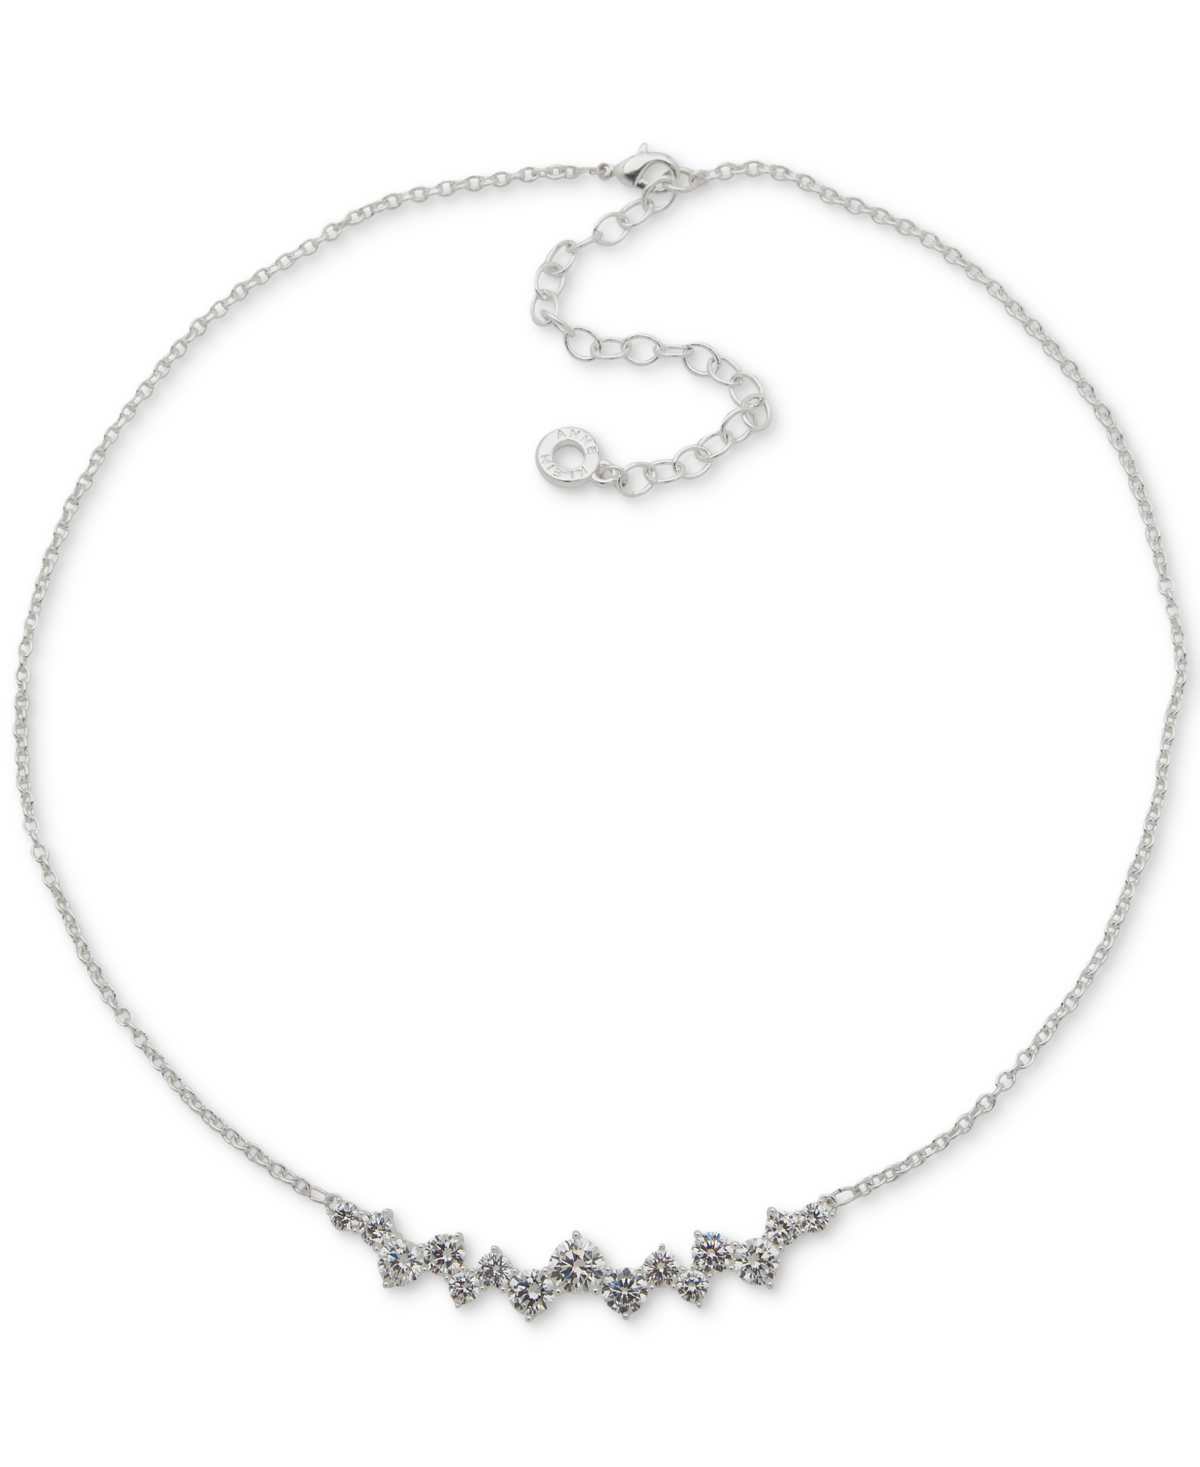 Silver-Tone Cubic Zirconia Statement Necklace, 16" + 3" extender - Crystal